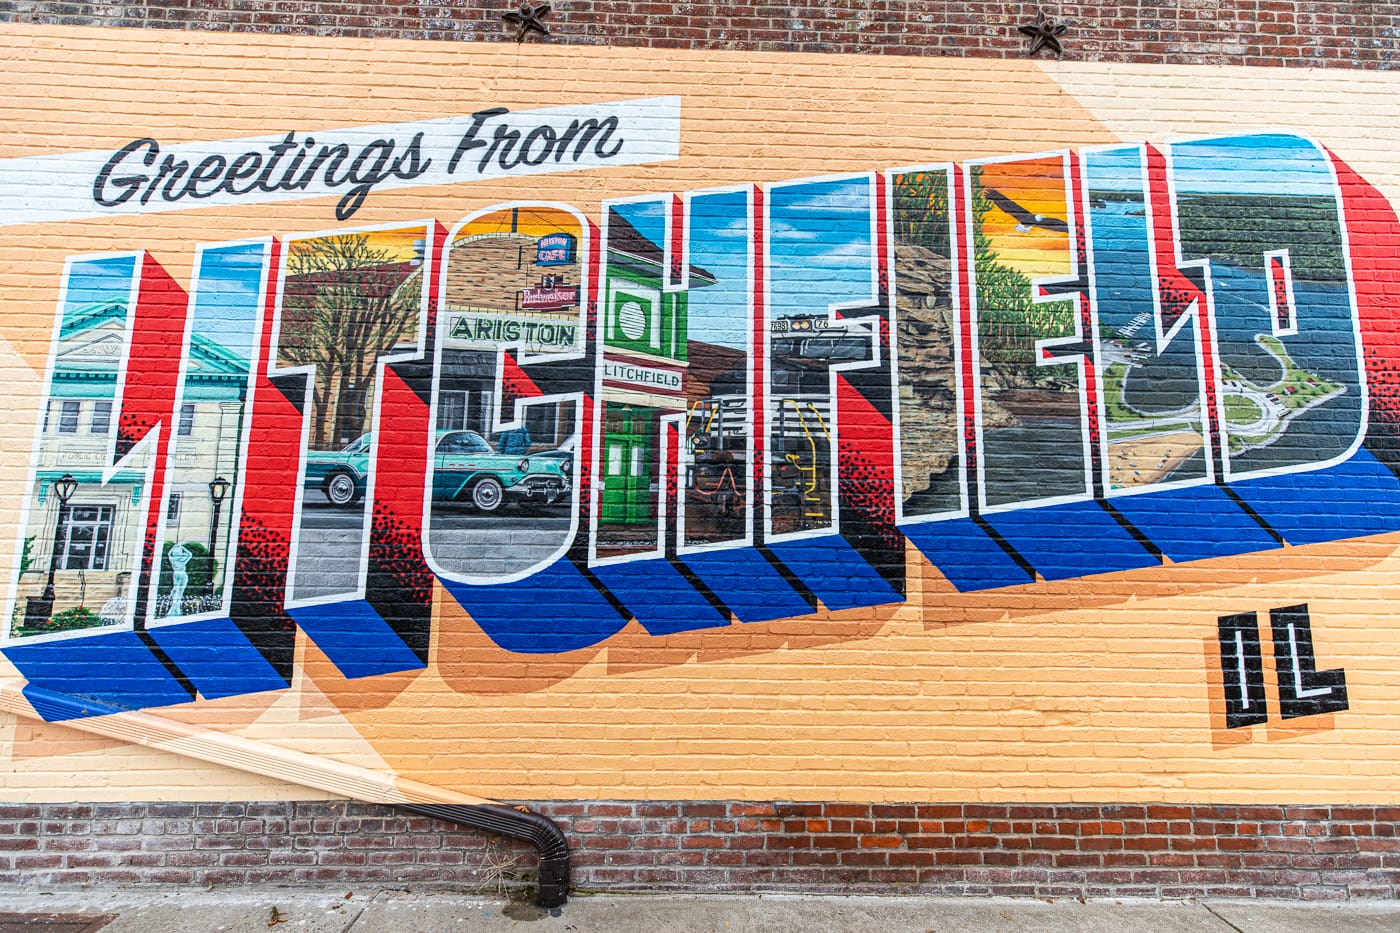 Greetings from Litchfield, Illinois postcard Mural on Route 66